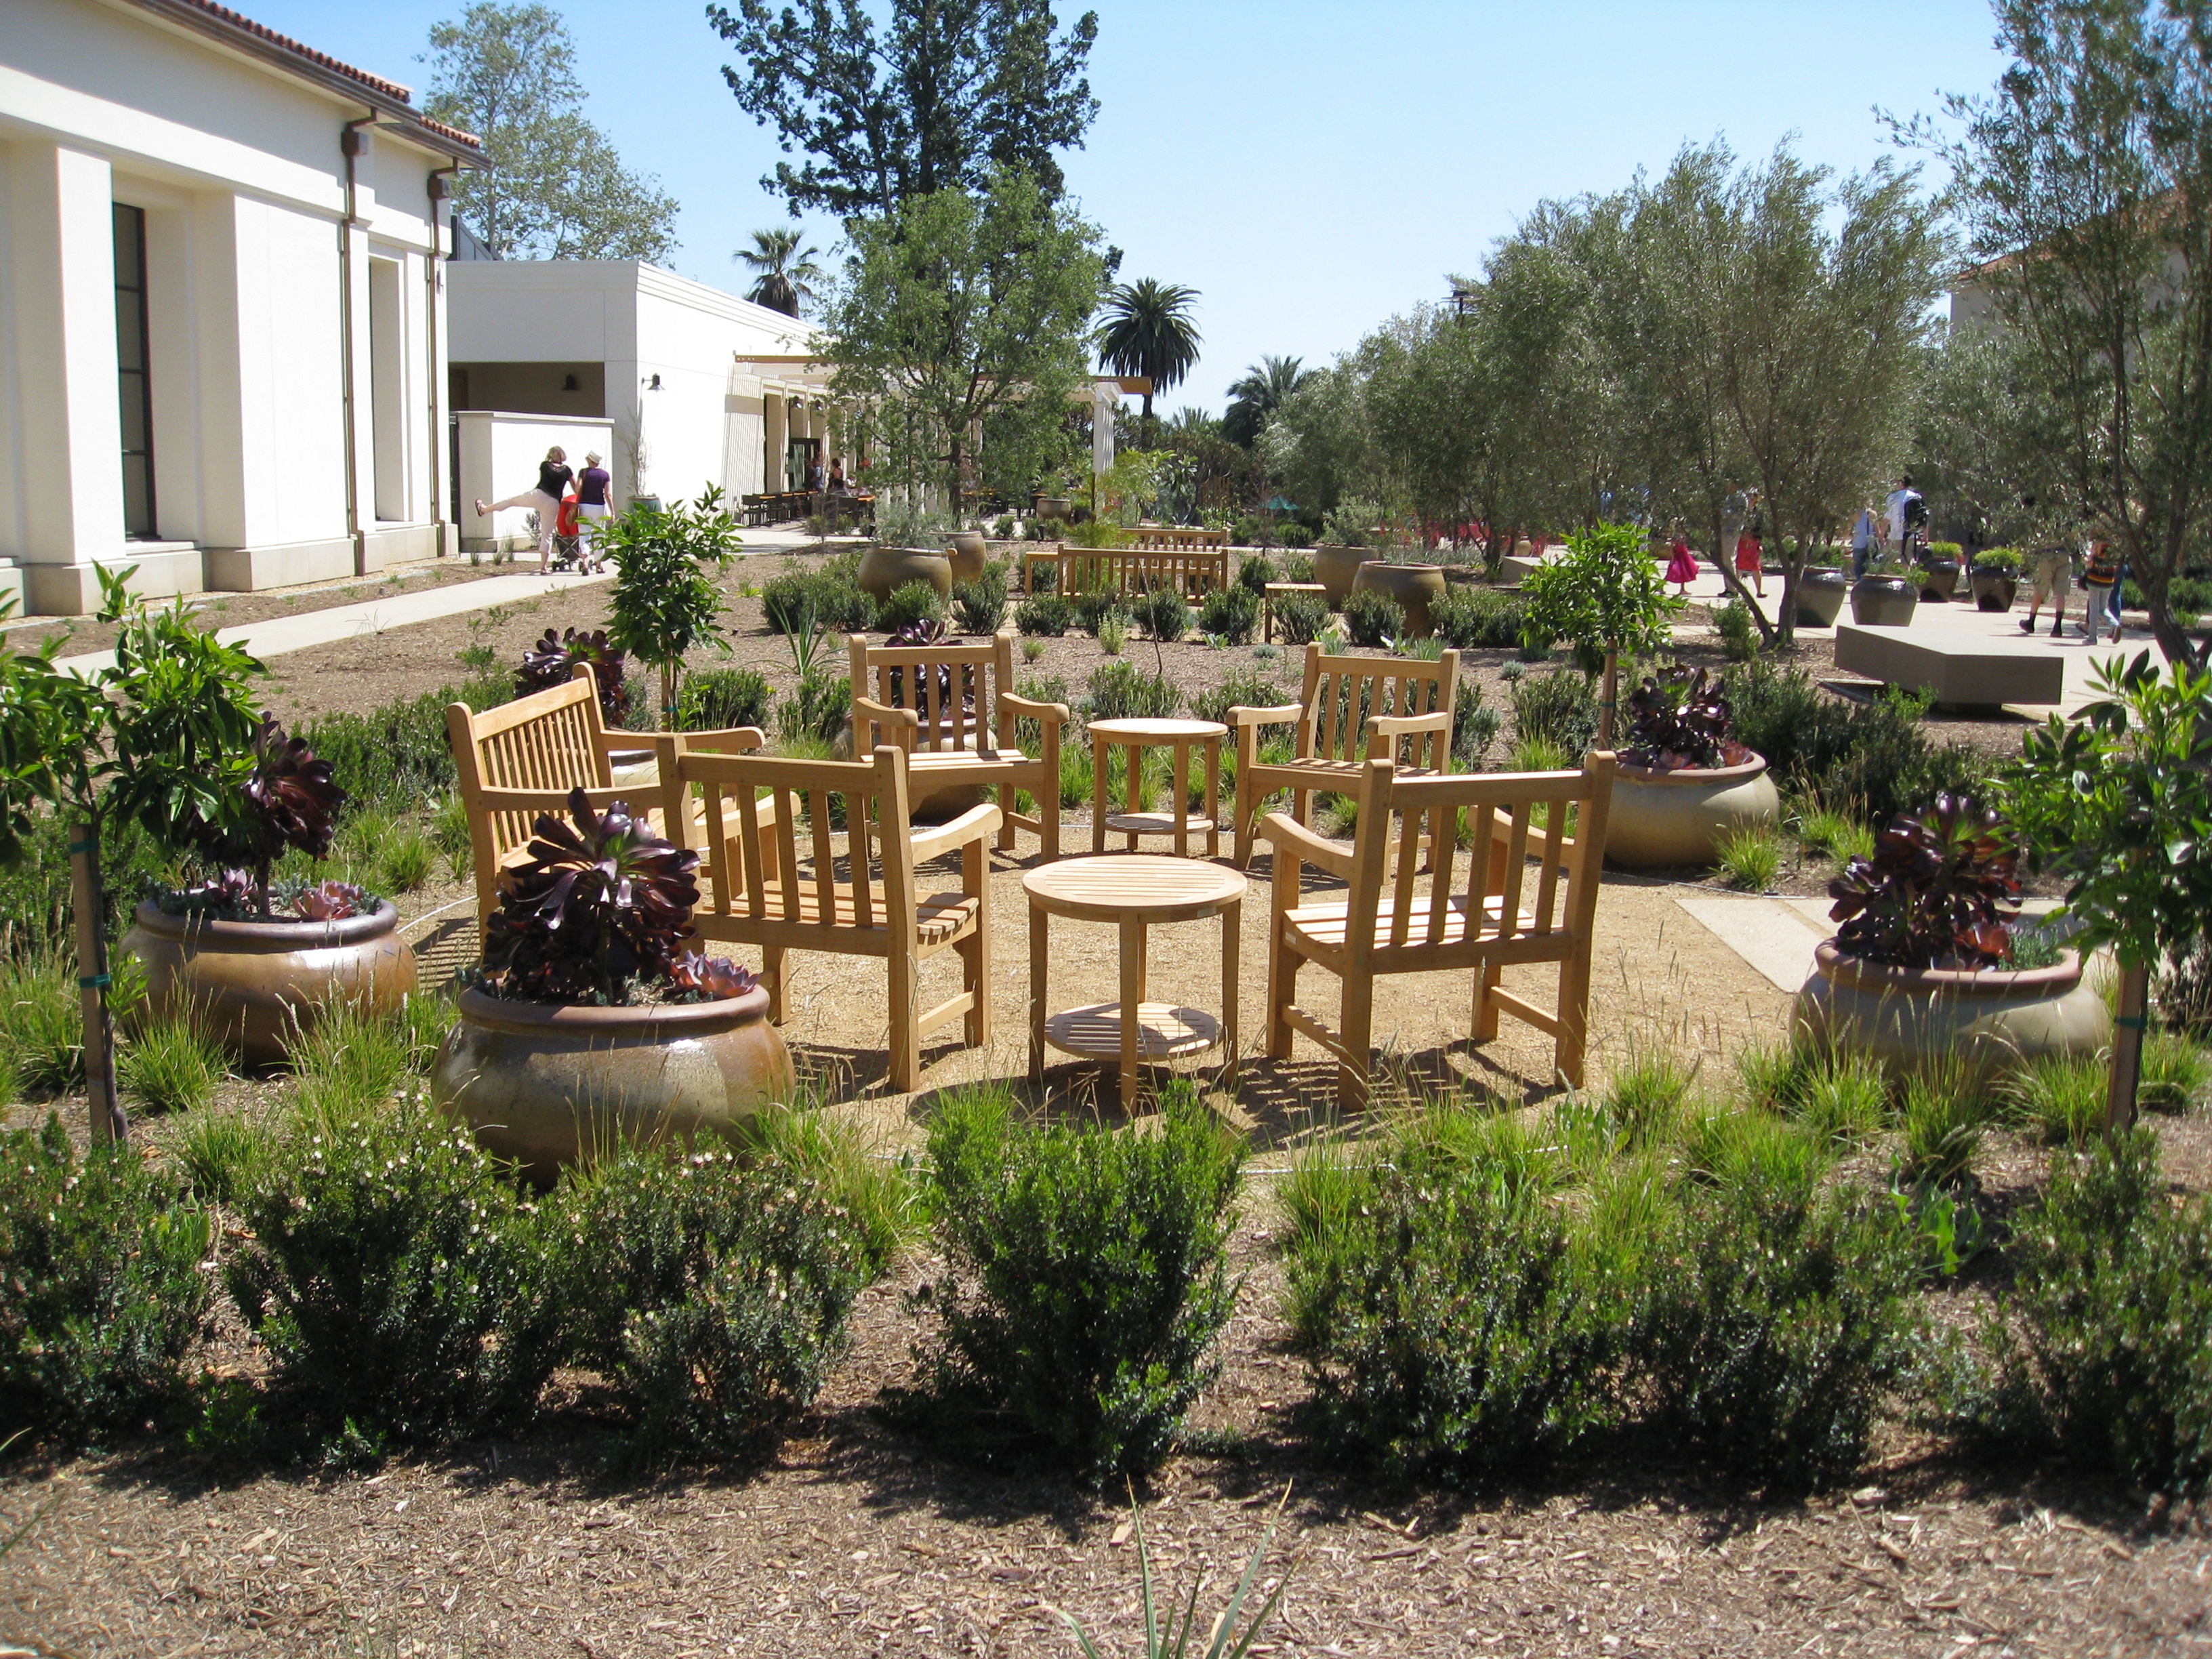 Seating areas surrounded by drought tolerant plants will provide a charming place to tuck away after a long walk through the gardens.